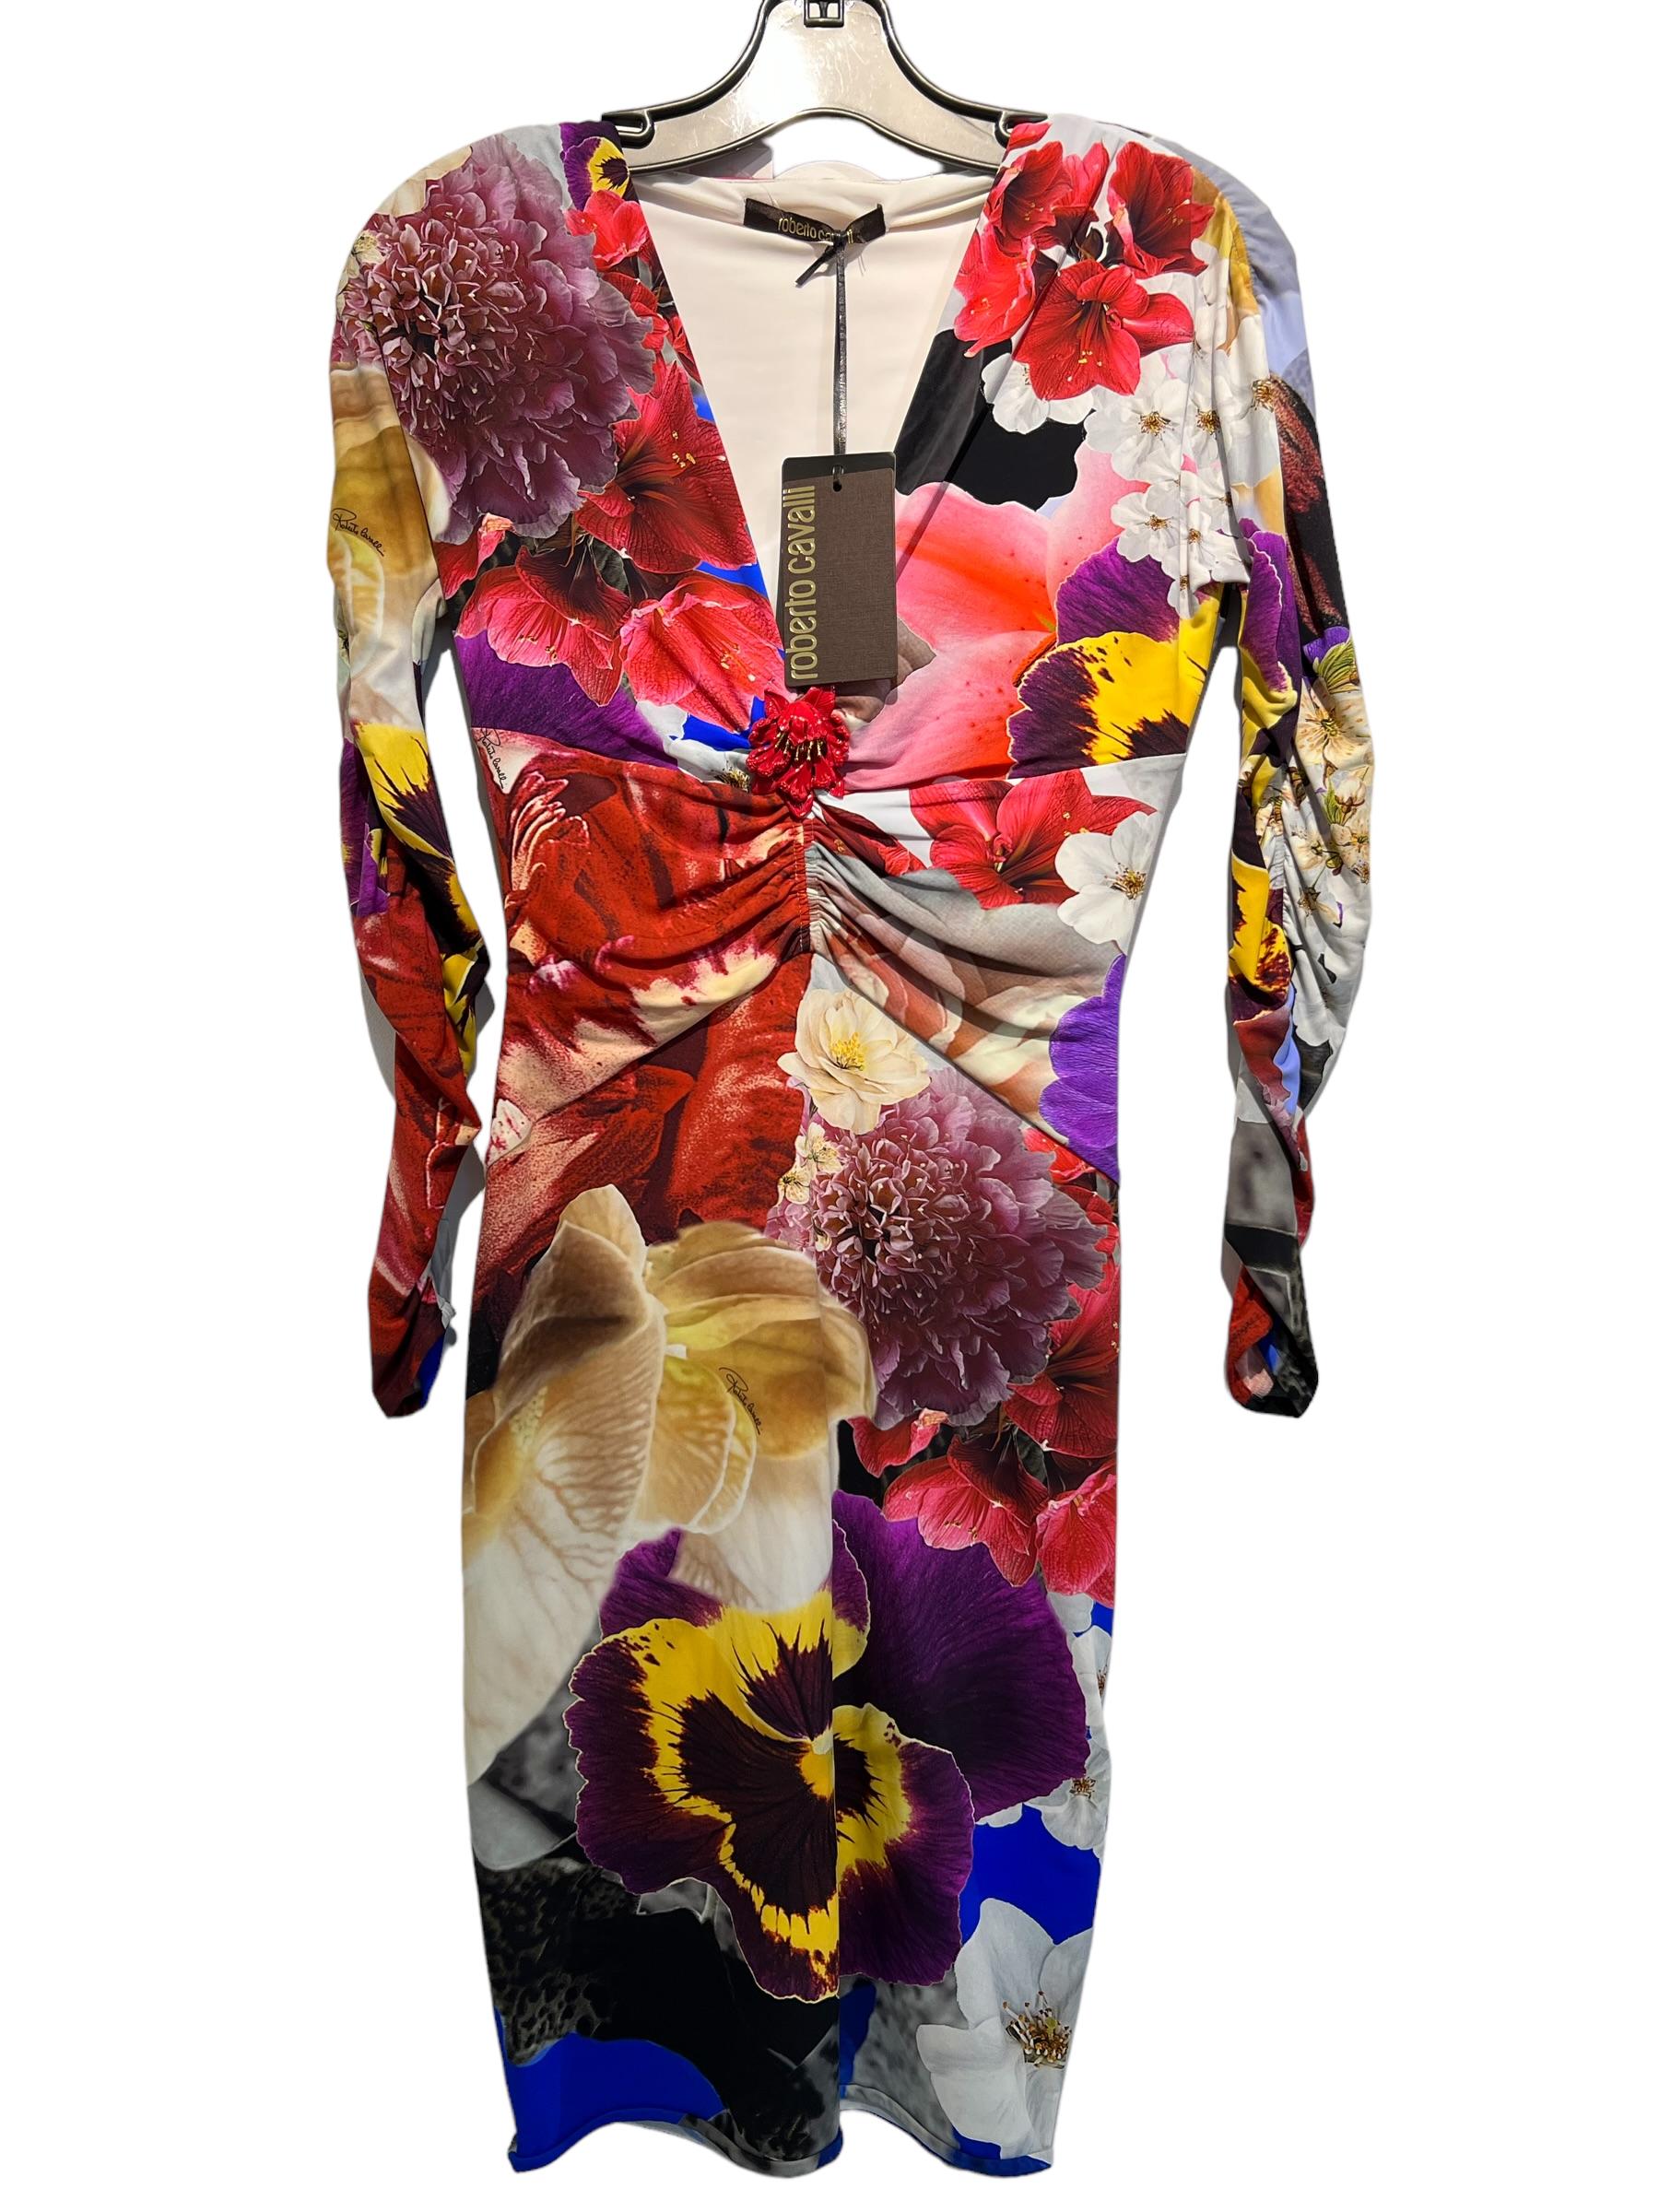 New Classy Floral-Print dress from ROBERTO CAVALLI featuring purple, Yellow and Red, ruched detailing, V- neck, long sleeves. 